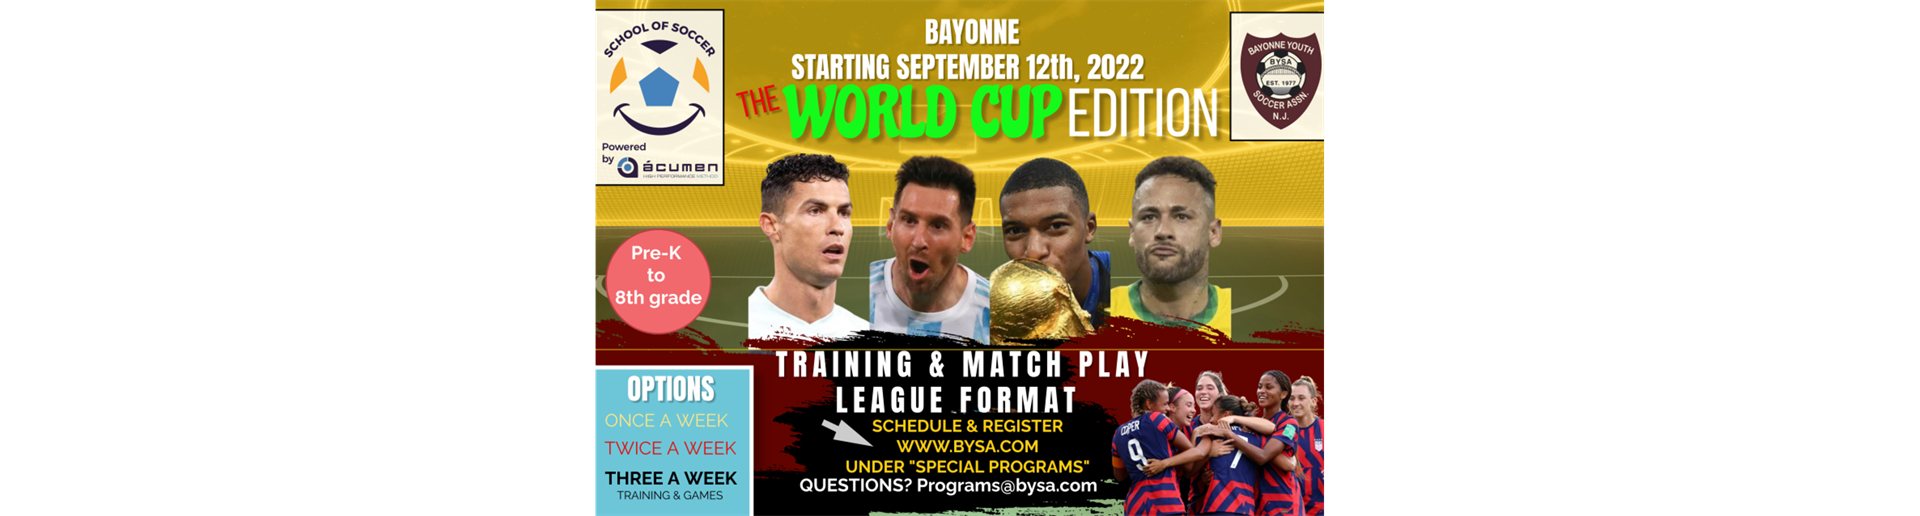 School of Soccer - World Cup Special Edition